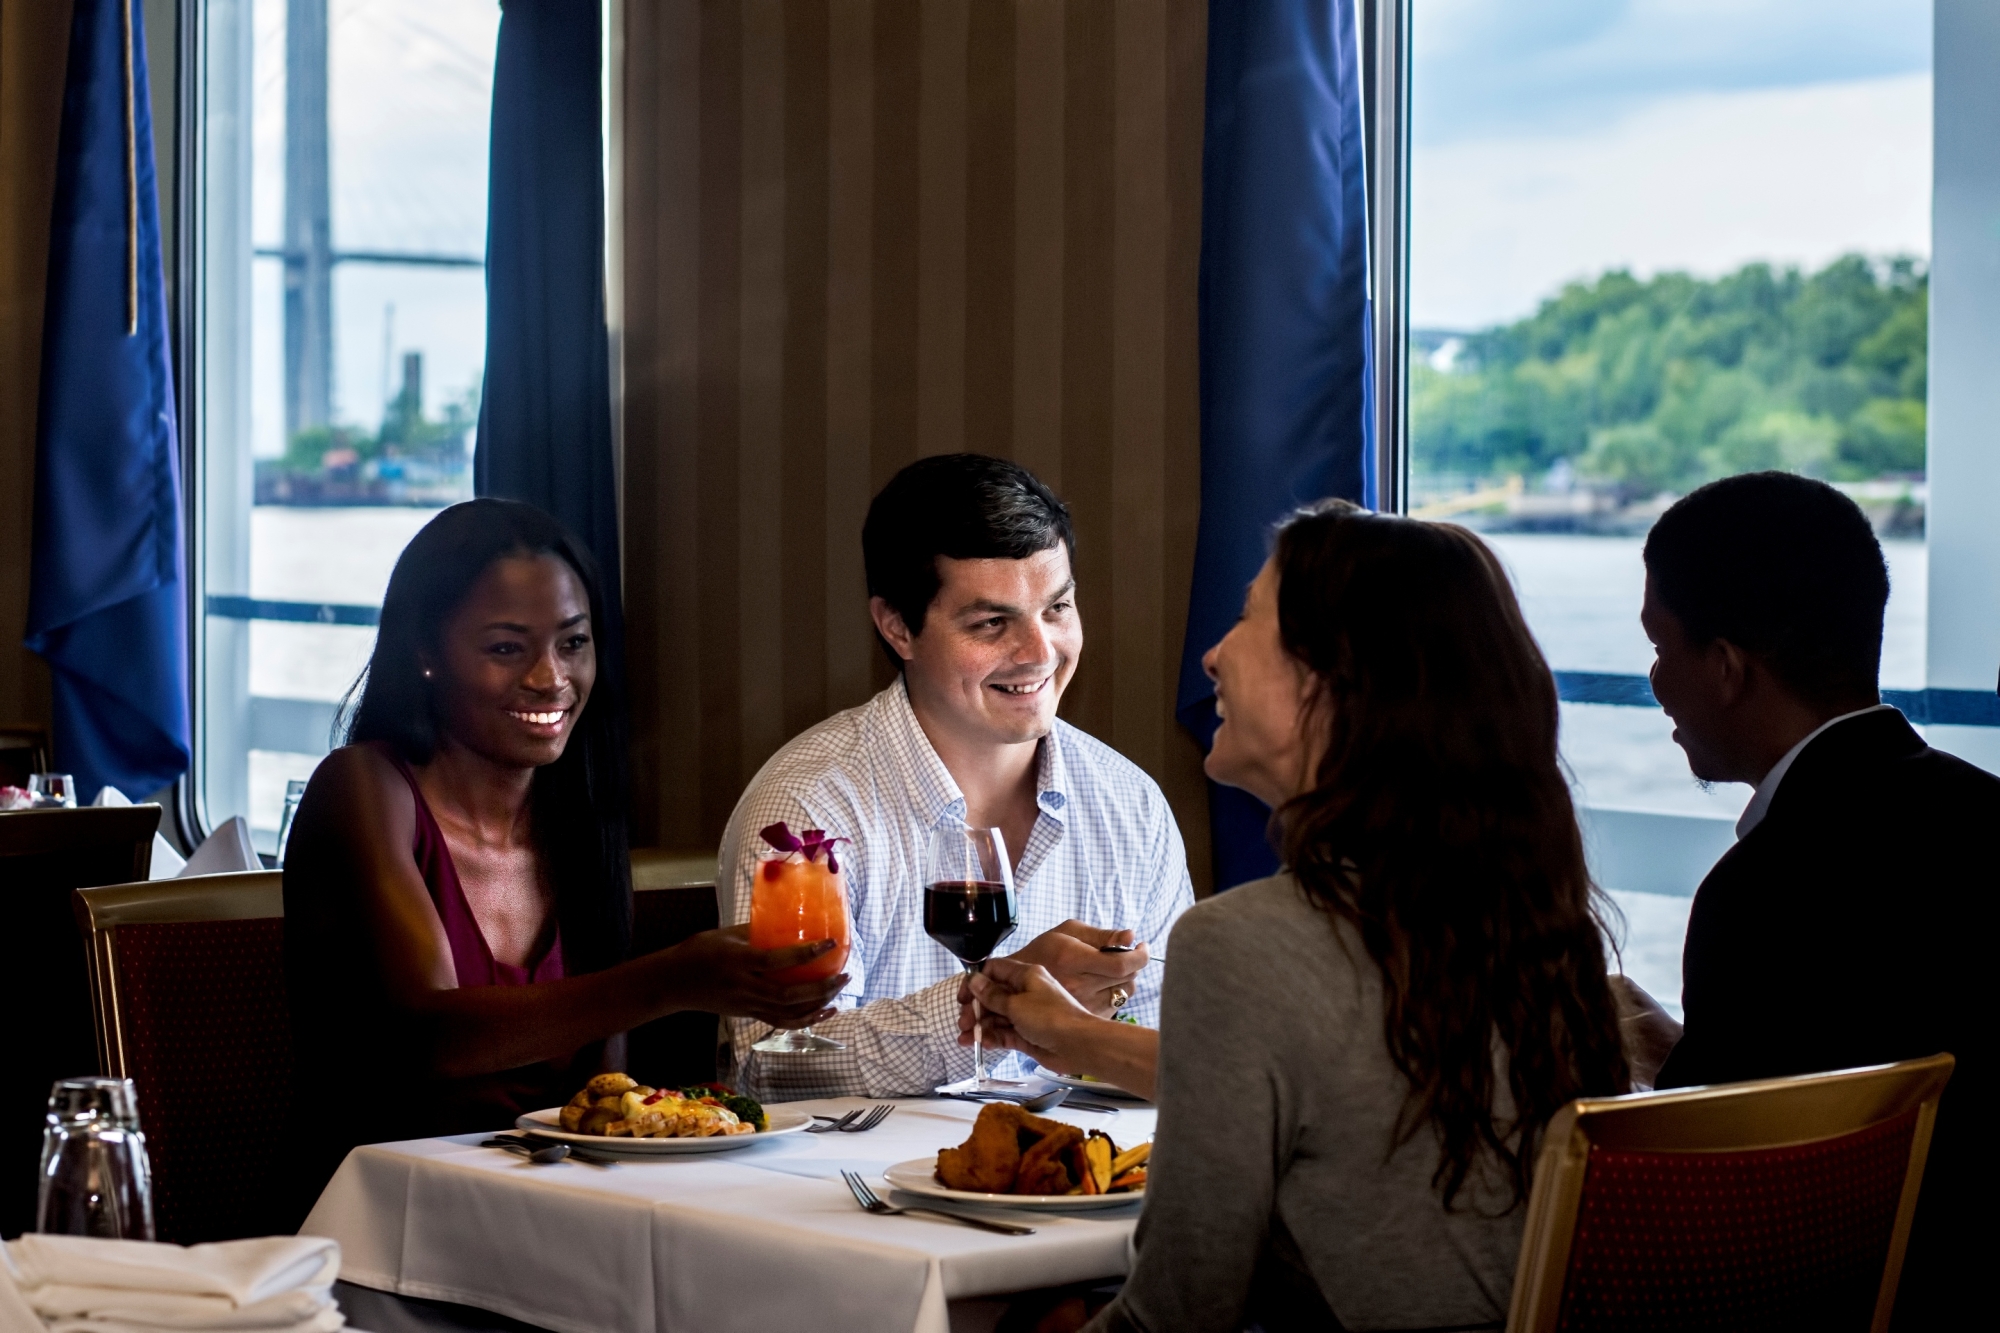 Dine with friends and family as you cruise the historic Savannah River!